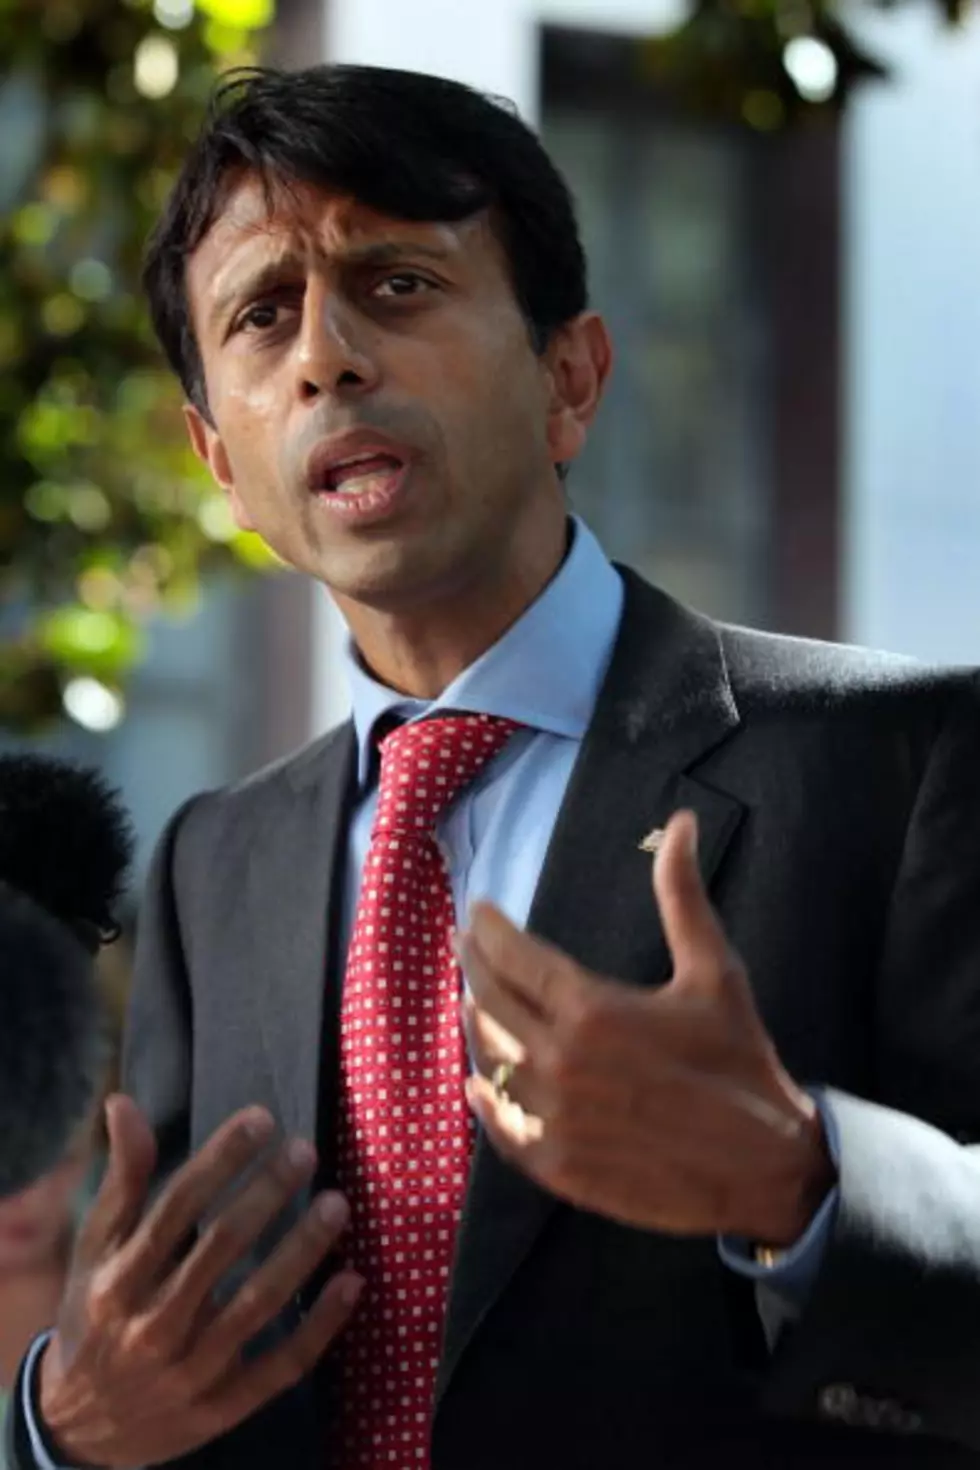 Governor Bobby Jindal To Speak At GOP Convention In Tampa